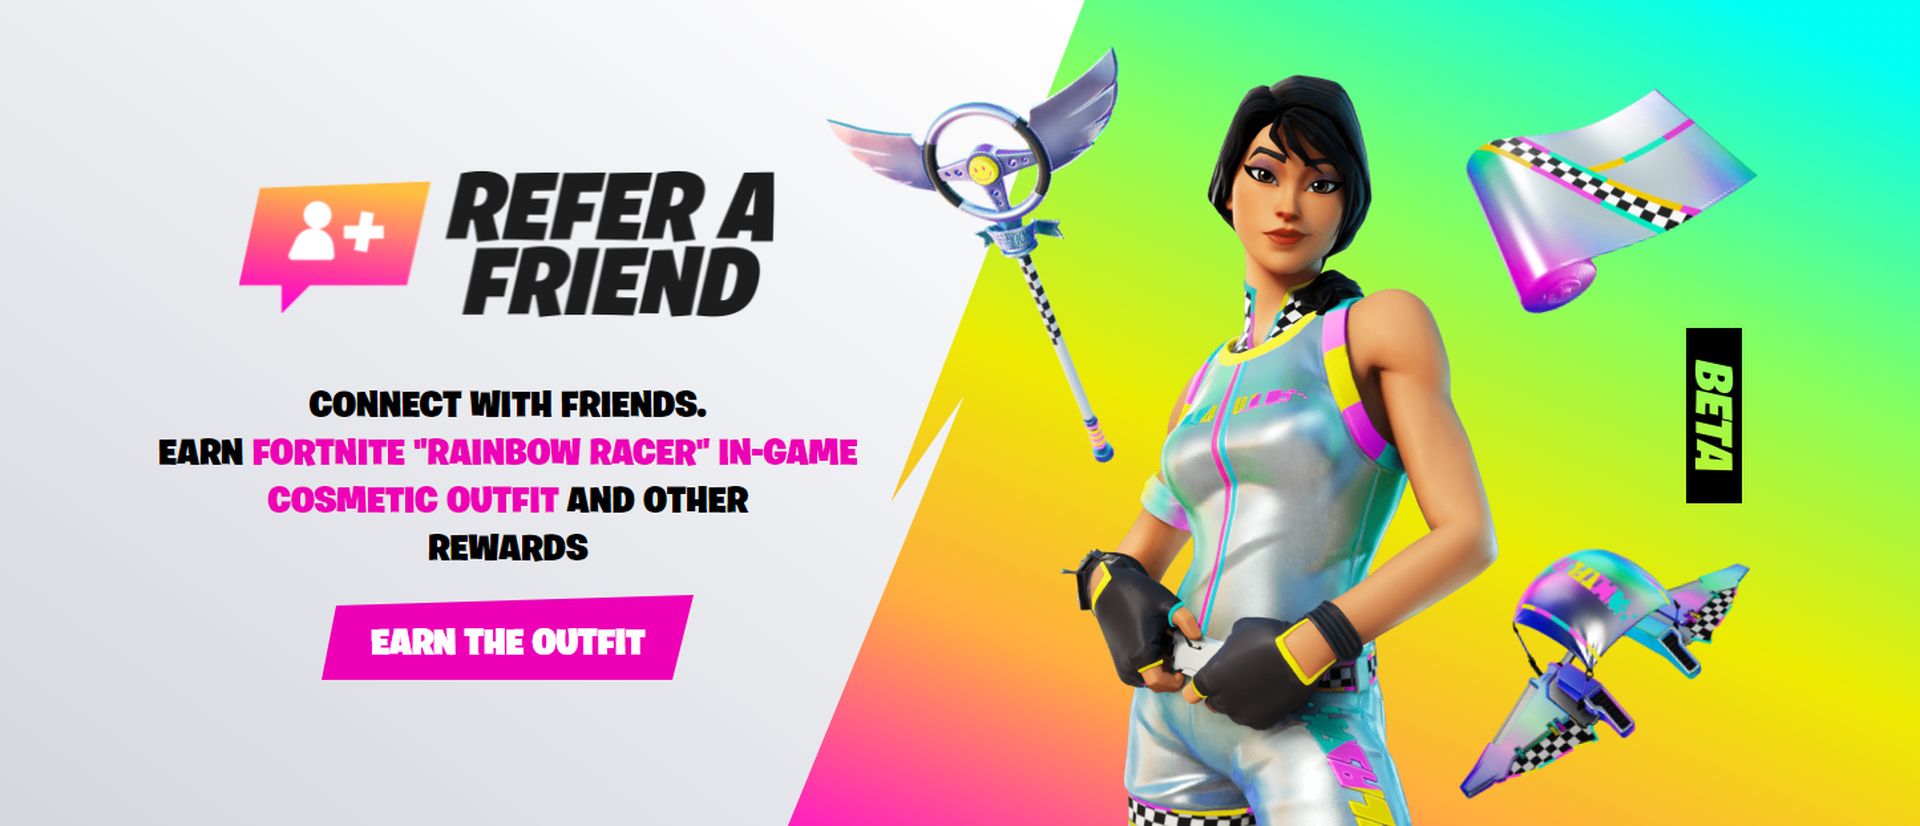 How To Refer A Friend In Fortnite Dot Esports